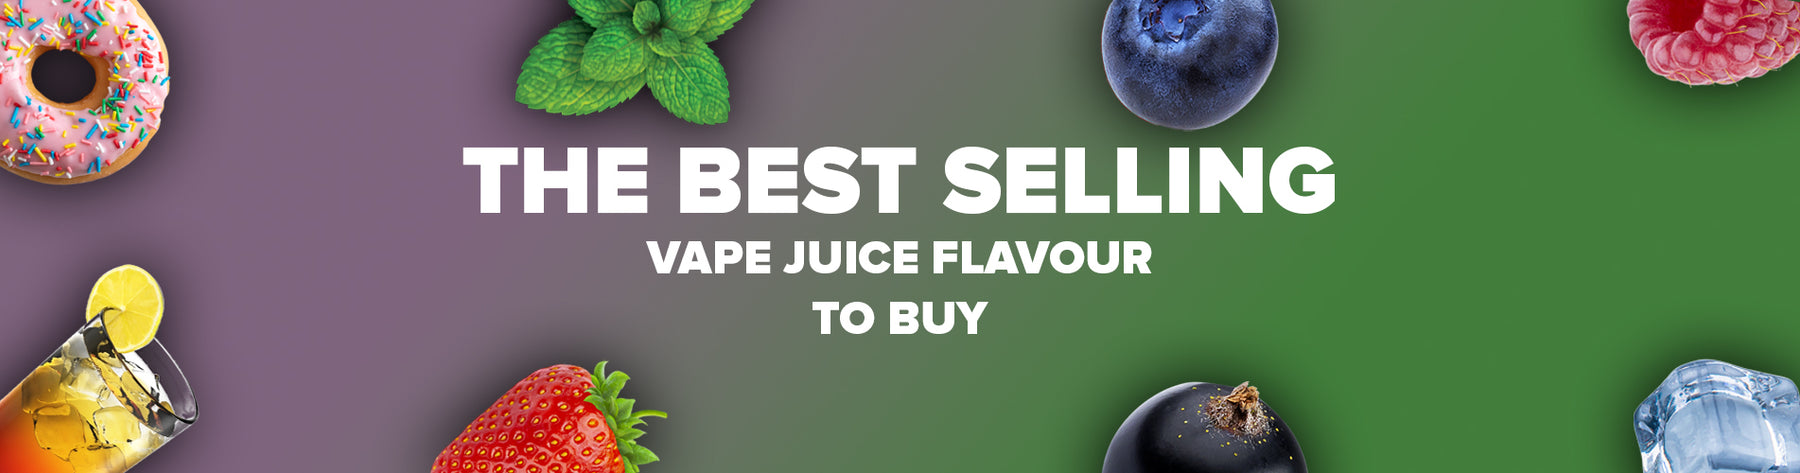 The Best Selling Vape Juice Flavours to buy